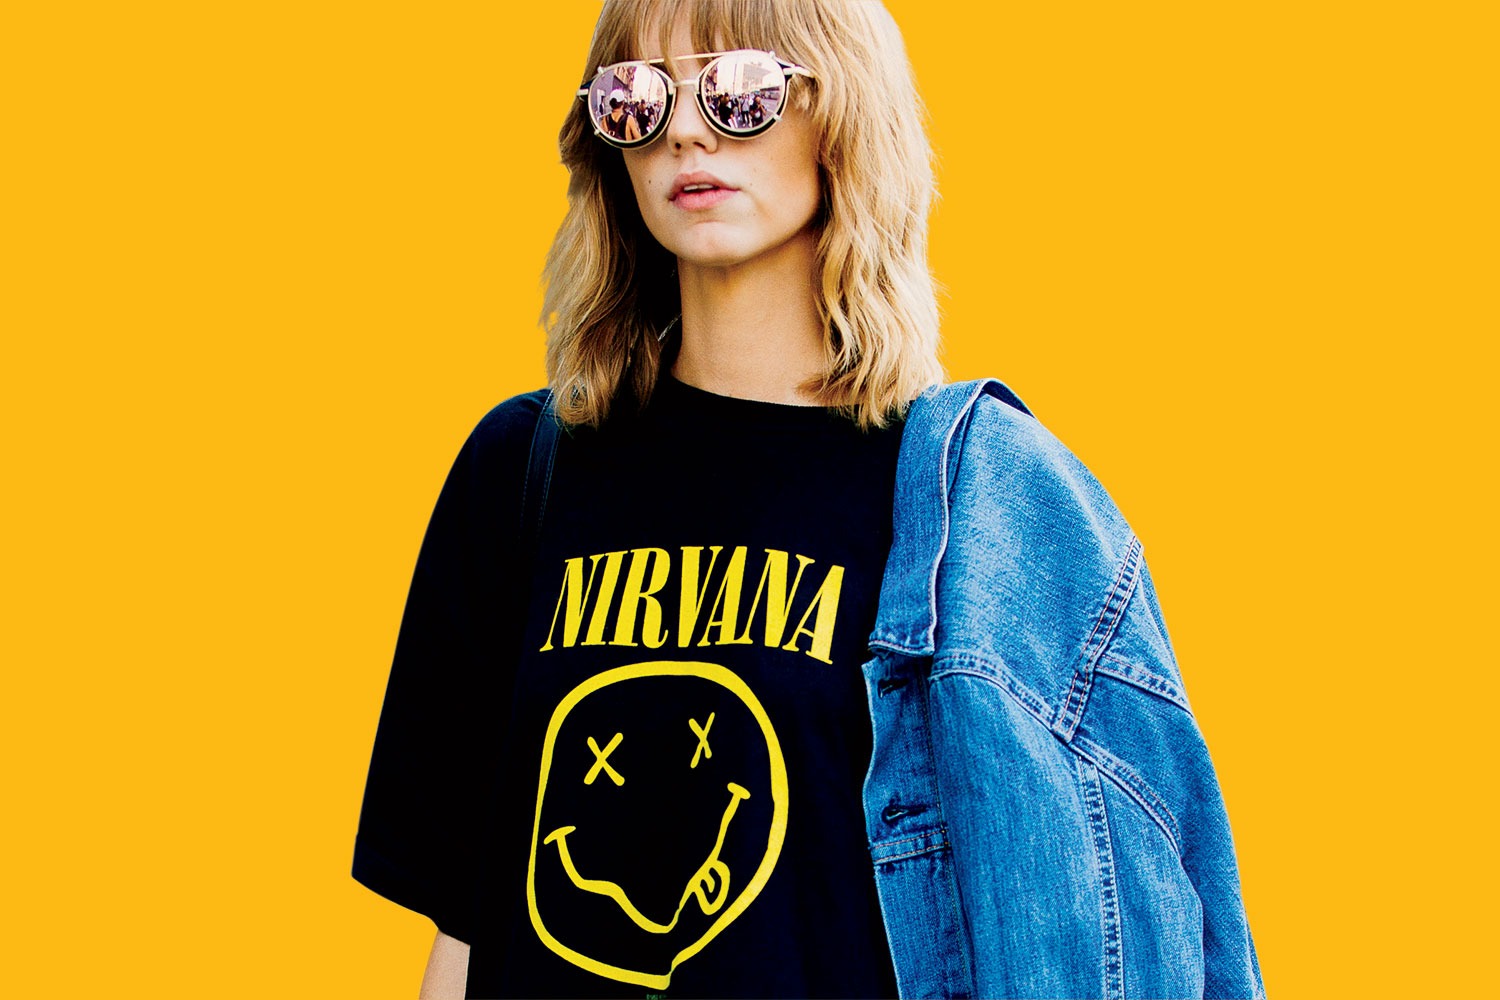 A woman in round sunglasses wearing a Nirvana t-shirt